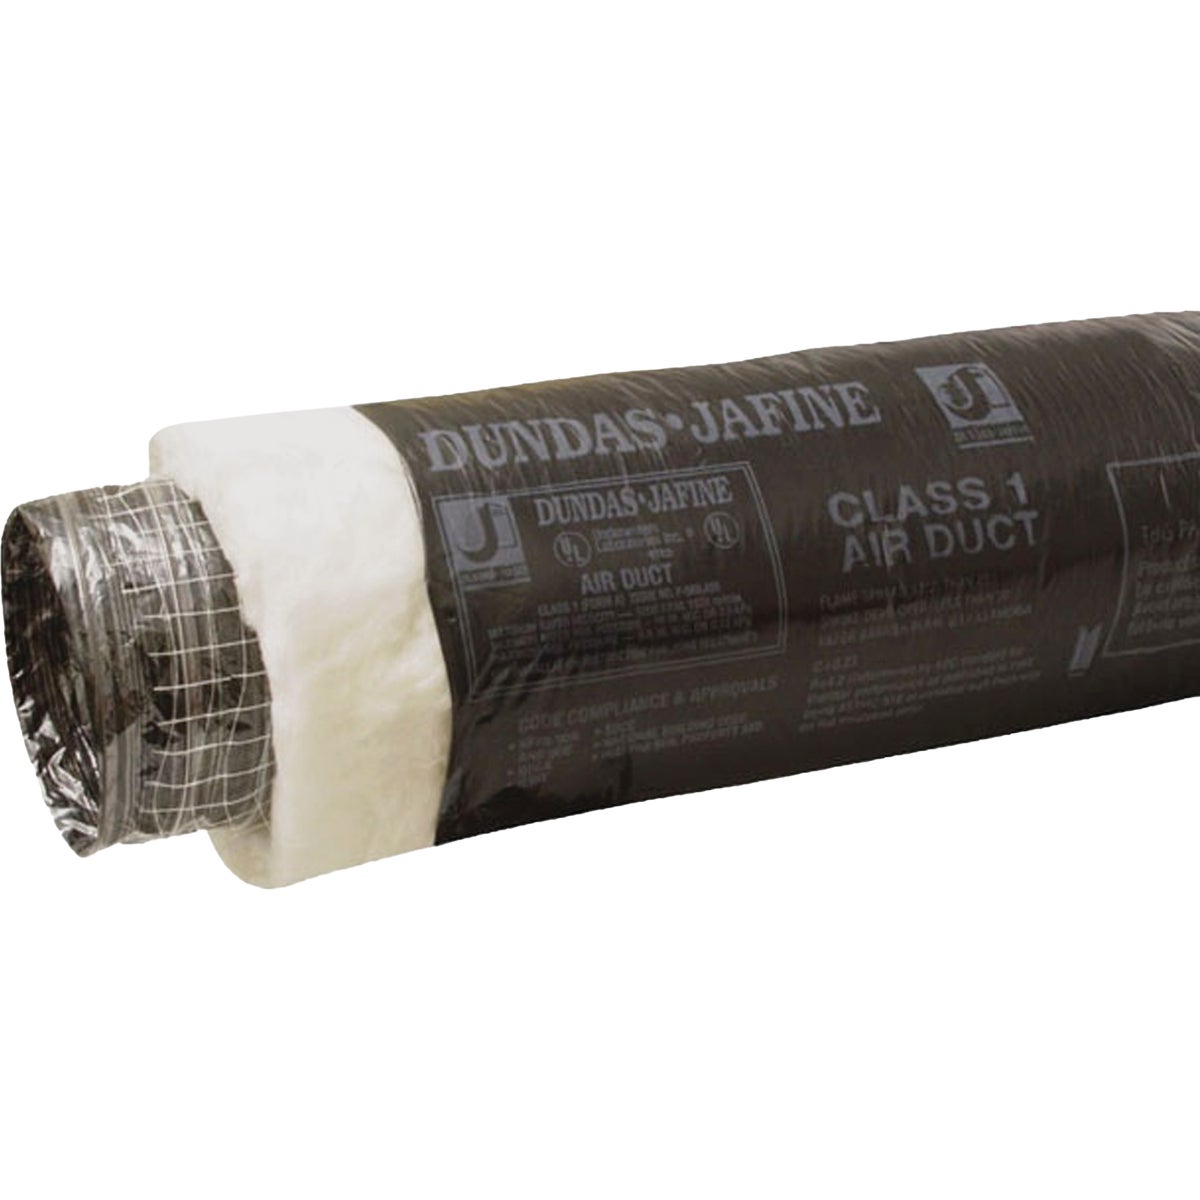 Dundas Jafine 12 In. I.D. x 25 Ft. R6.0 Black Jacket Flexible Insulated Ducting